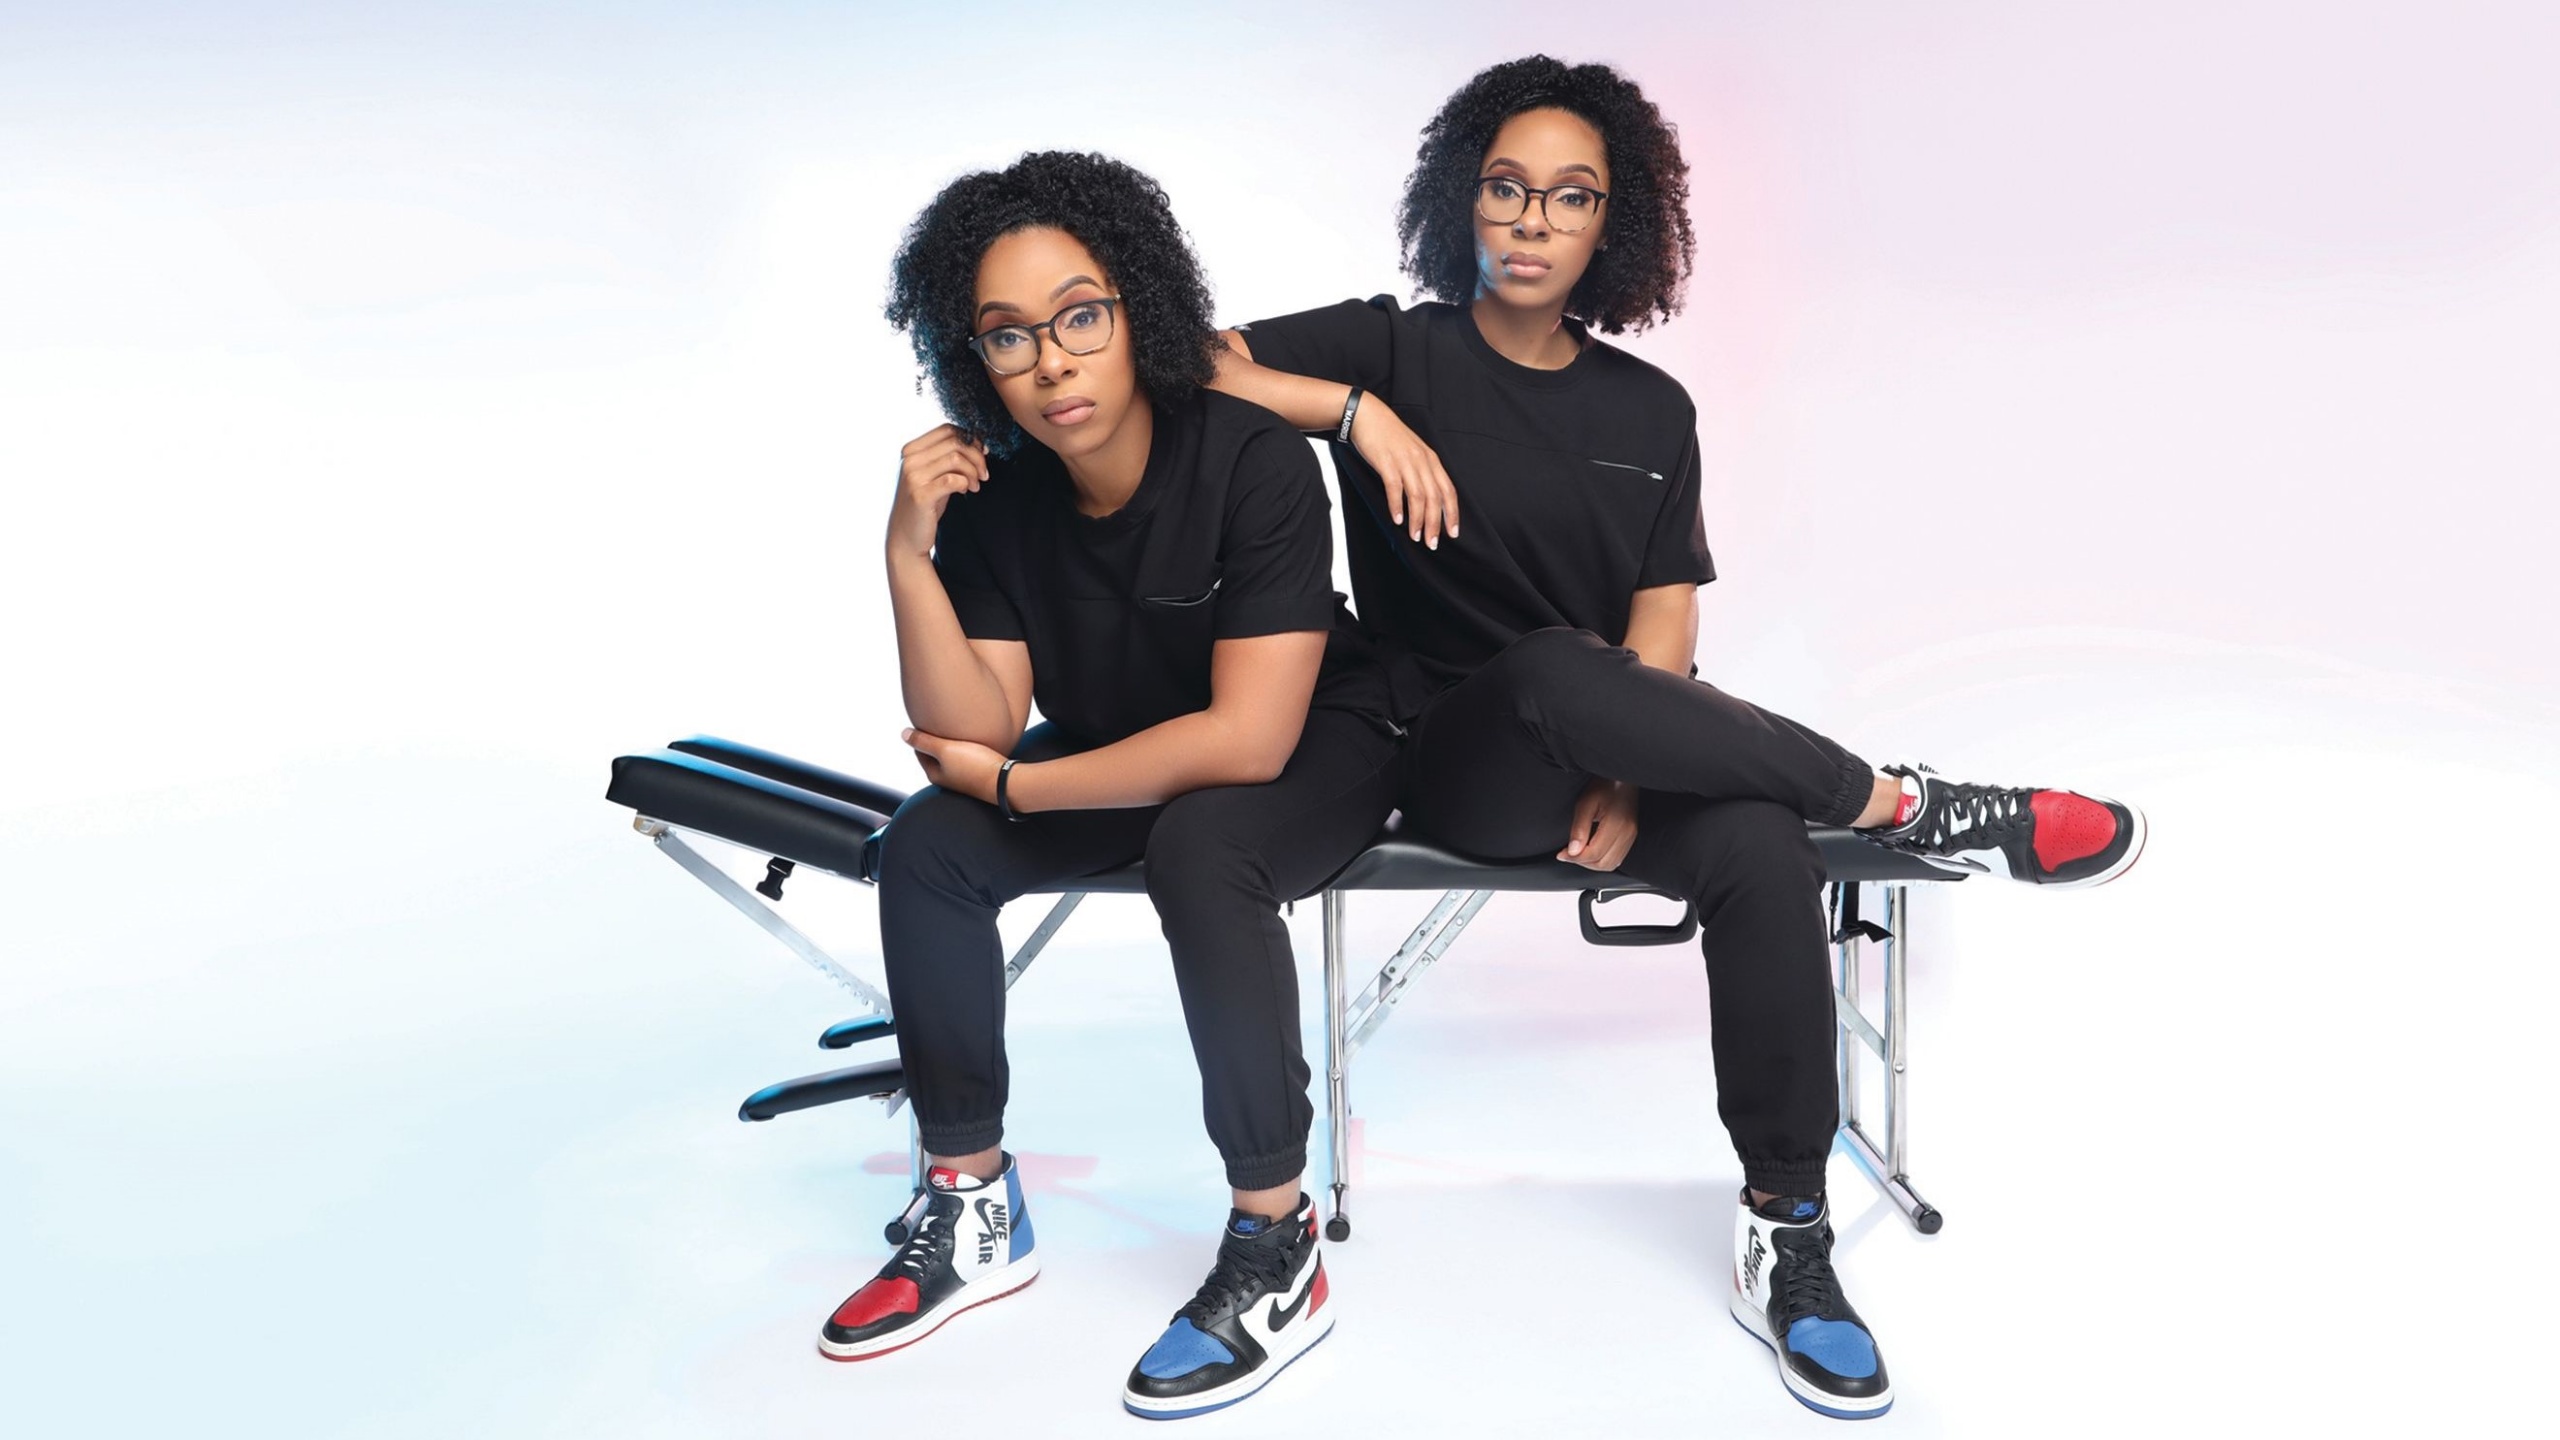 The Harris twins are ready to 'combine our love of food, chiropractic, exercise and business' while educating on the importance of diversity